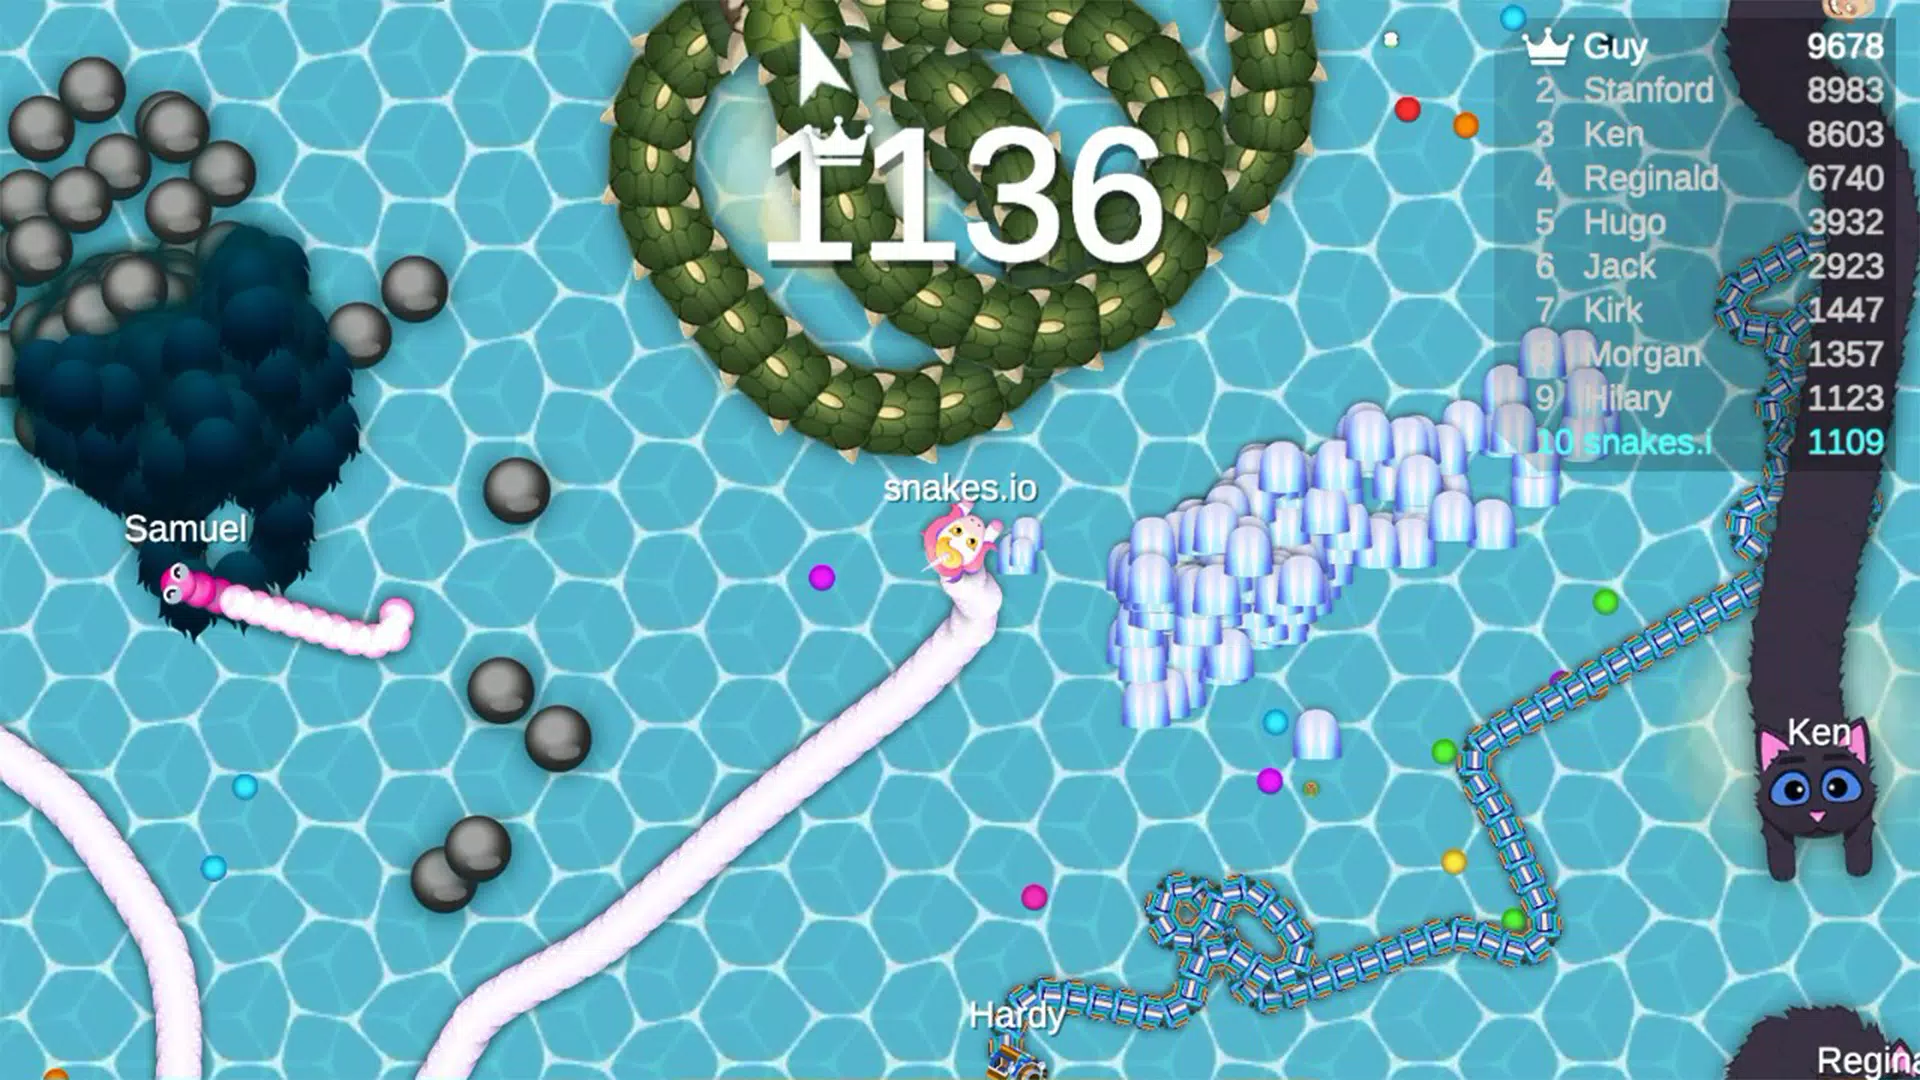 Snack Snake.io-Snake .io Game Apk Download for Android- Latest version  1.0.24- com.slither.io.snake.lite.fun.worm.game